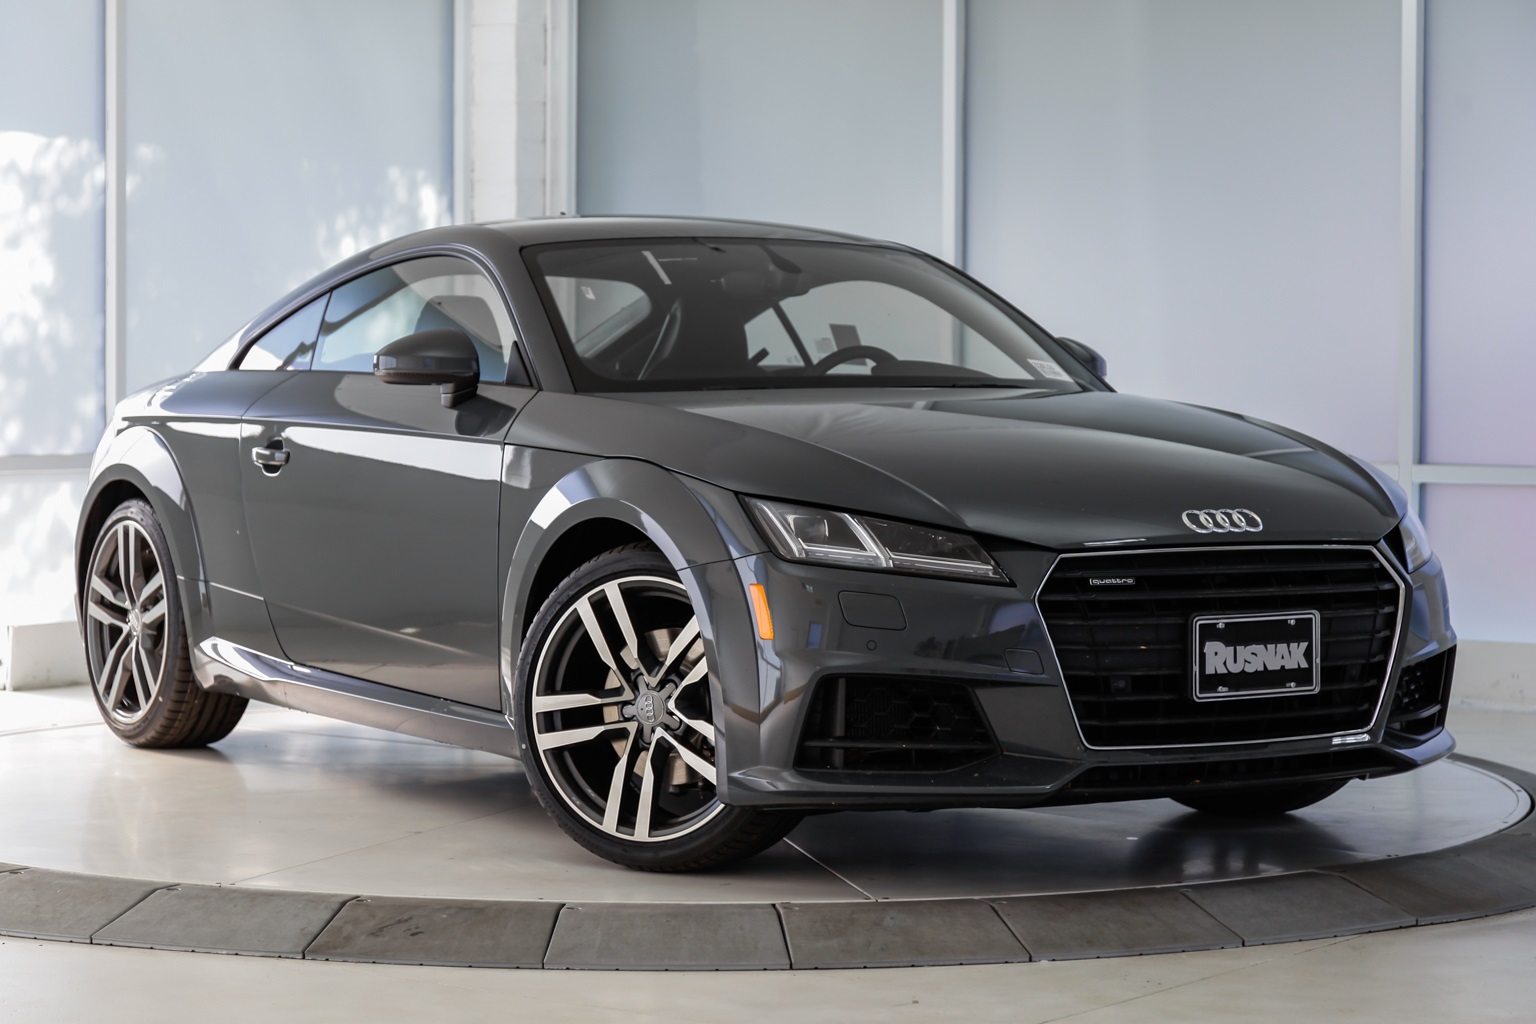 New 2020 Audi TT 2.0T 2D Coupe in Pasadena #22201324 | Rusnak Auto Group